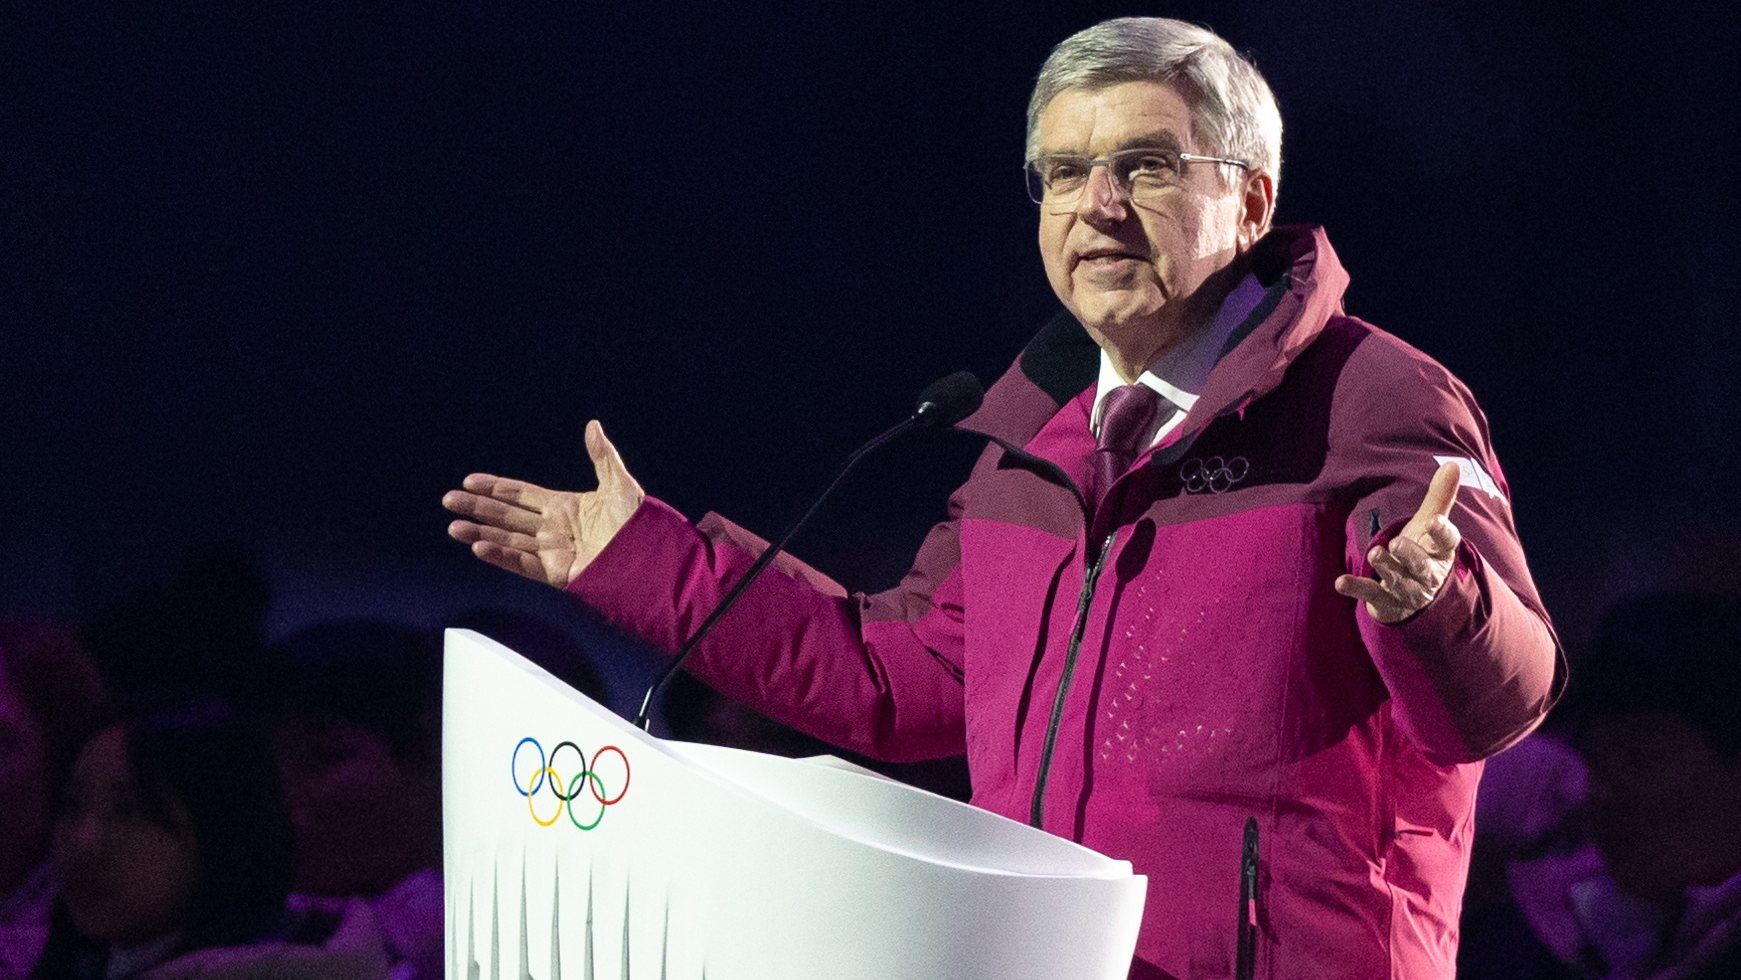 epa11089497 A handout photo made available by the OIS/IOC shows Thomas Bach, President of the International Olympic Committee, delivering a speech during the Opening Ceremony of the Winter Youth Olympic Games, in Gangwon, South Korea, 19 January 2024.  EPA/Chloe Knott for OIS/IOC HANDOUT  HANDOUT EDITORIAL USE ONLY/NO SALES HANDOUT EDITORIAL USE ONLY/NO SALES